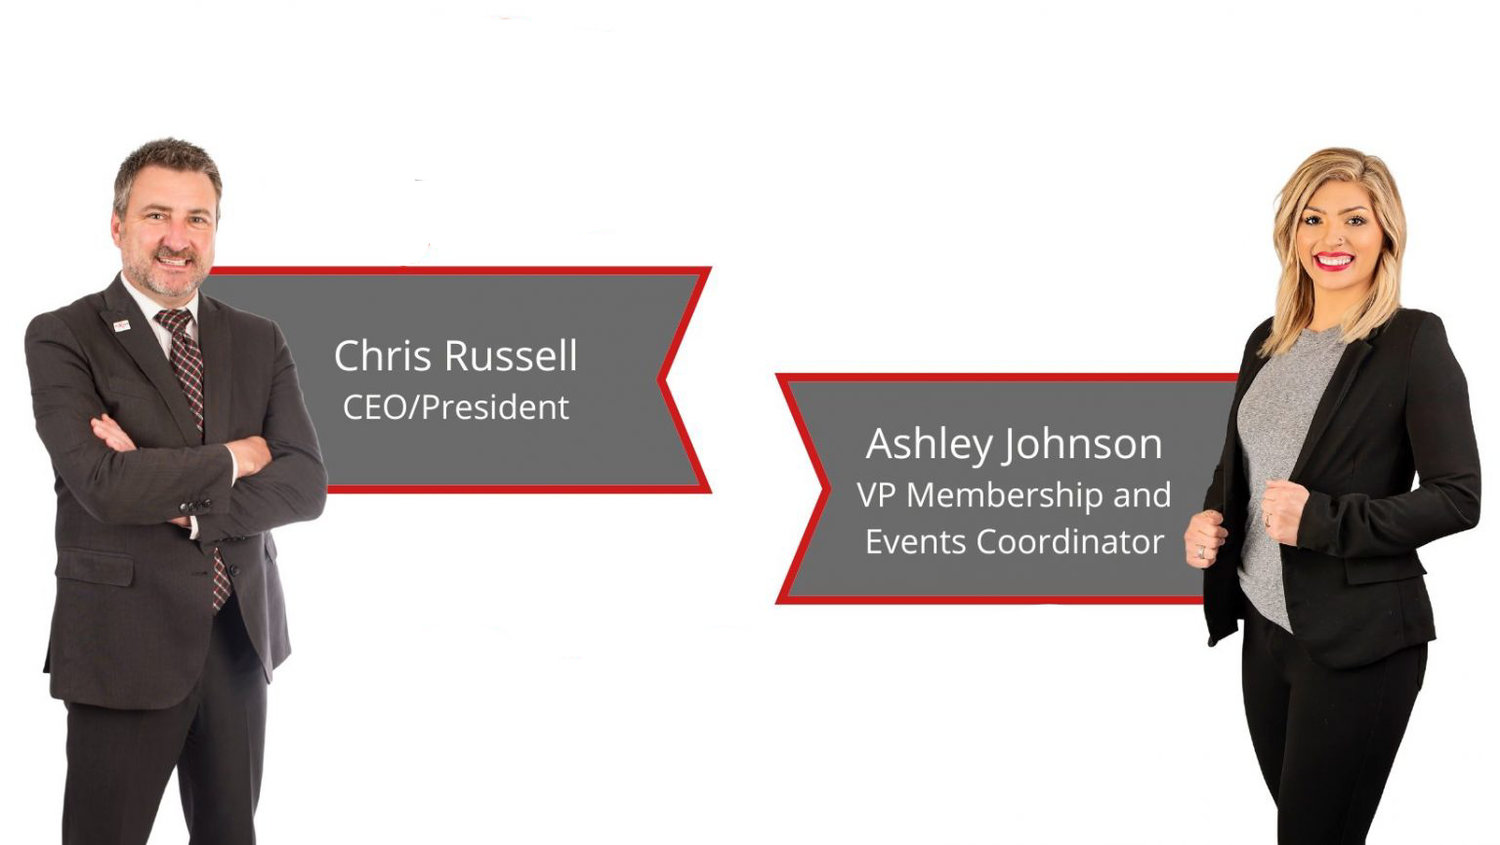 Chris Russell is being succeeded by Ashley Johnson on an interim basis.